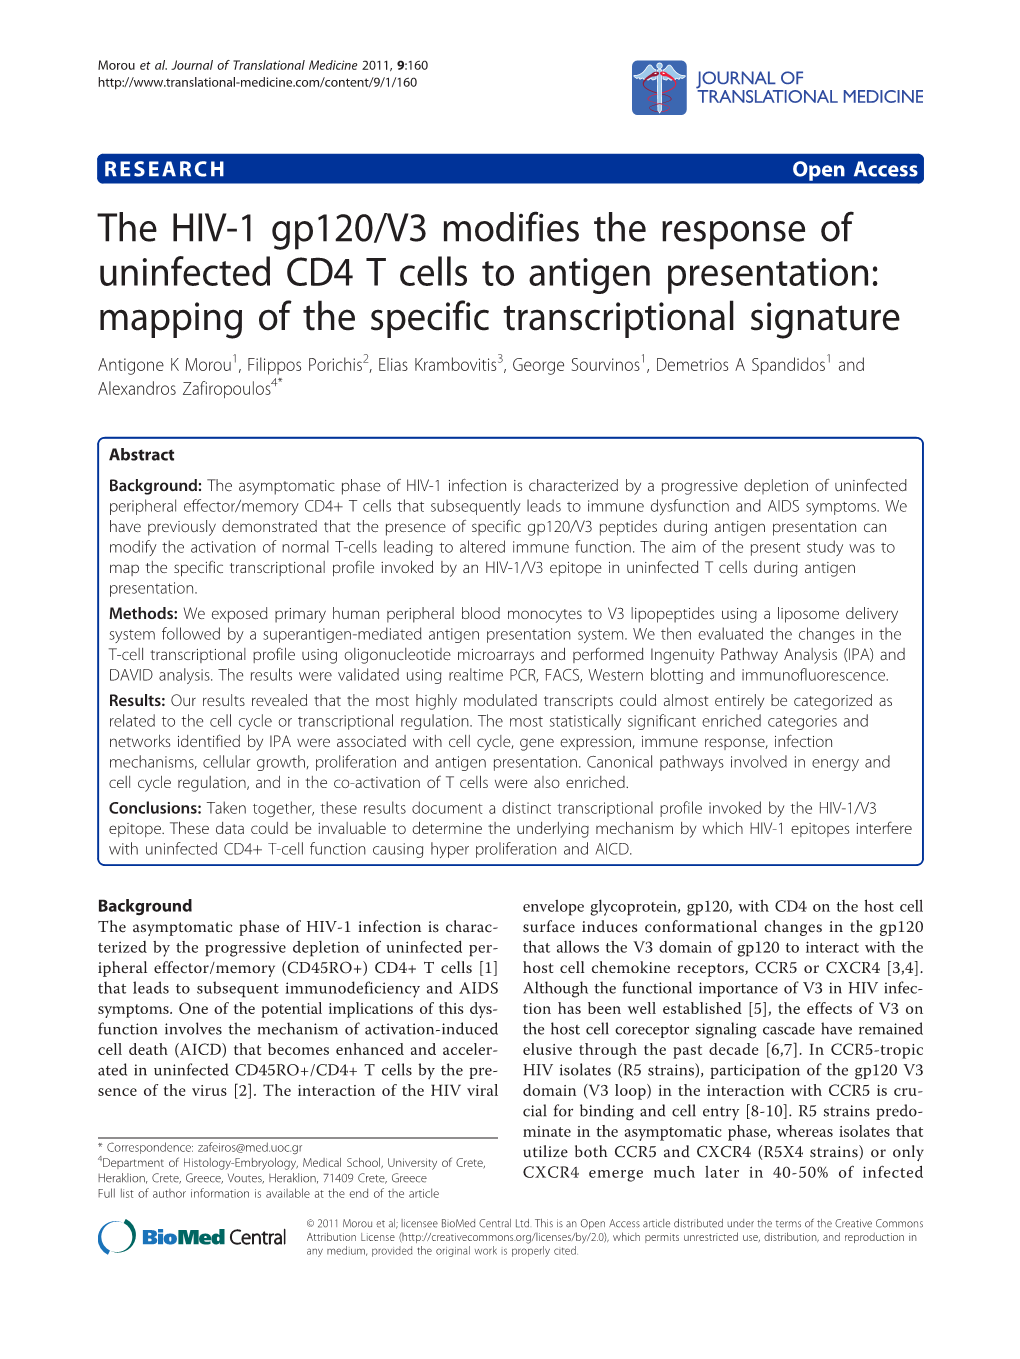 The HIV-1 Gp120/V3 Modifies the Response of Uninfected CD4 T Cells